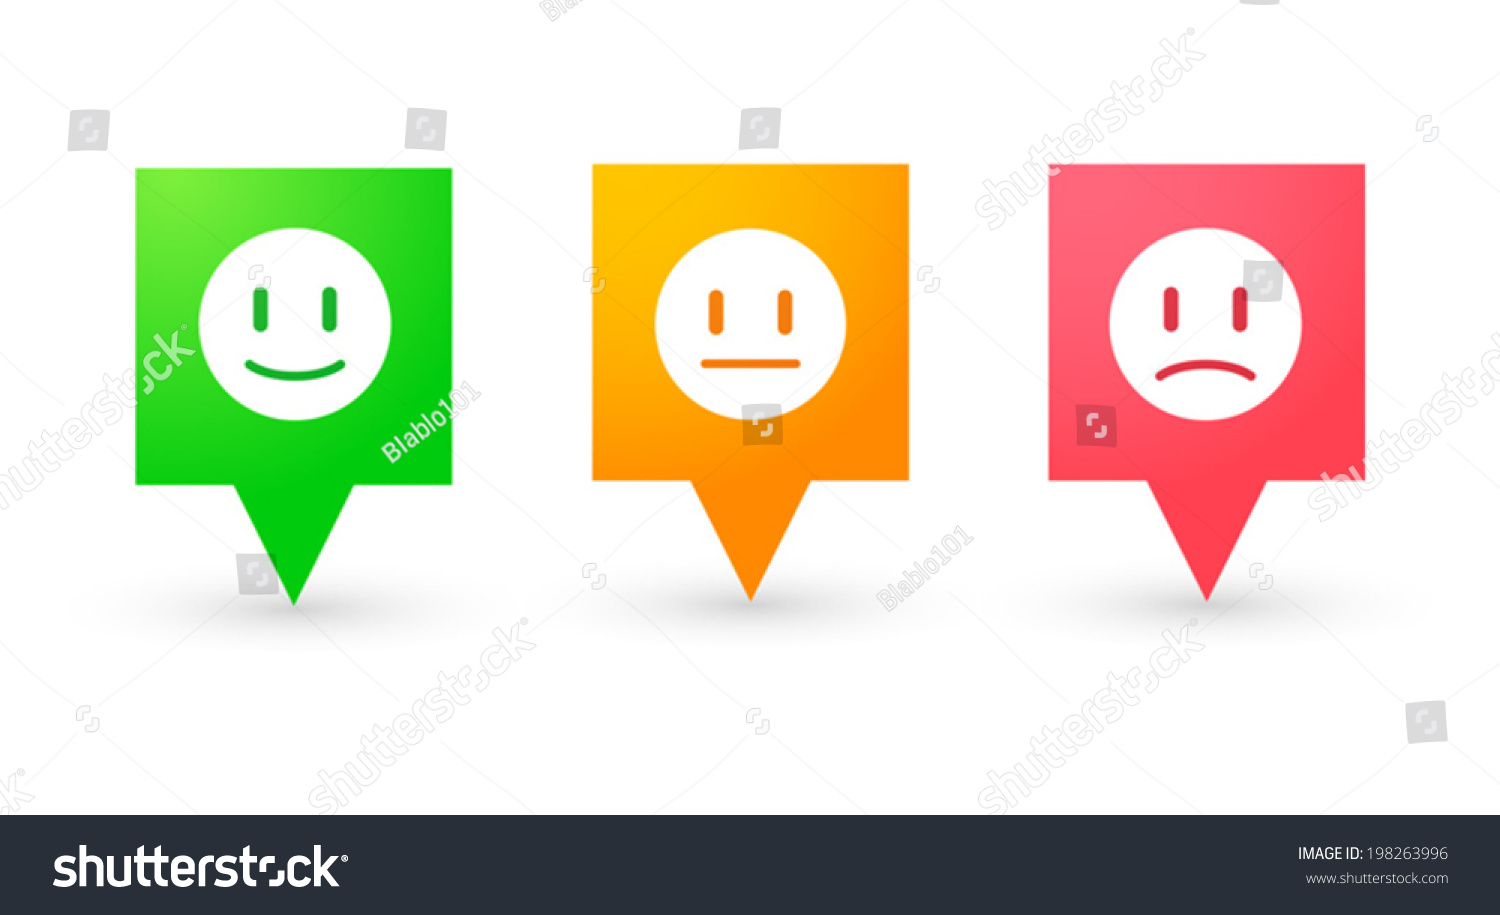 Illustration Isolated Tooltip Icon Set Stock Vector 198263996 Shutterstock 0233